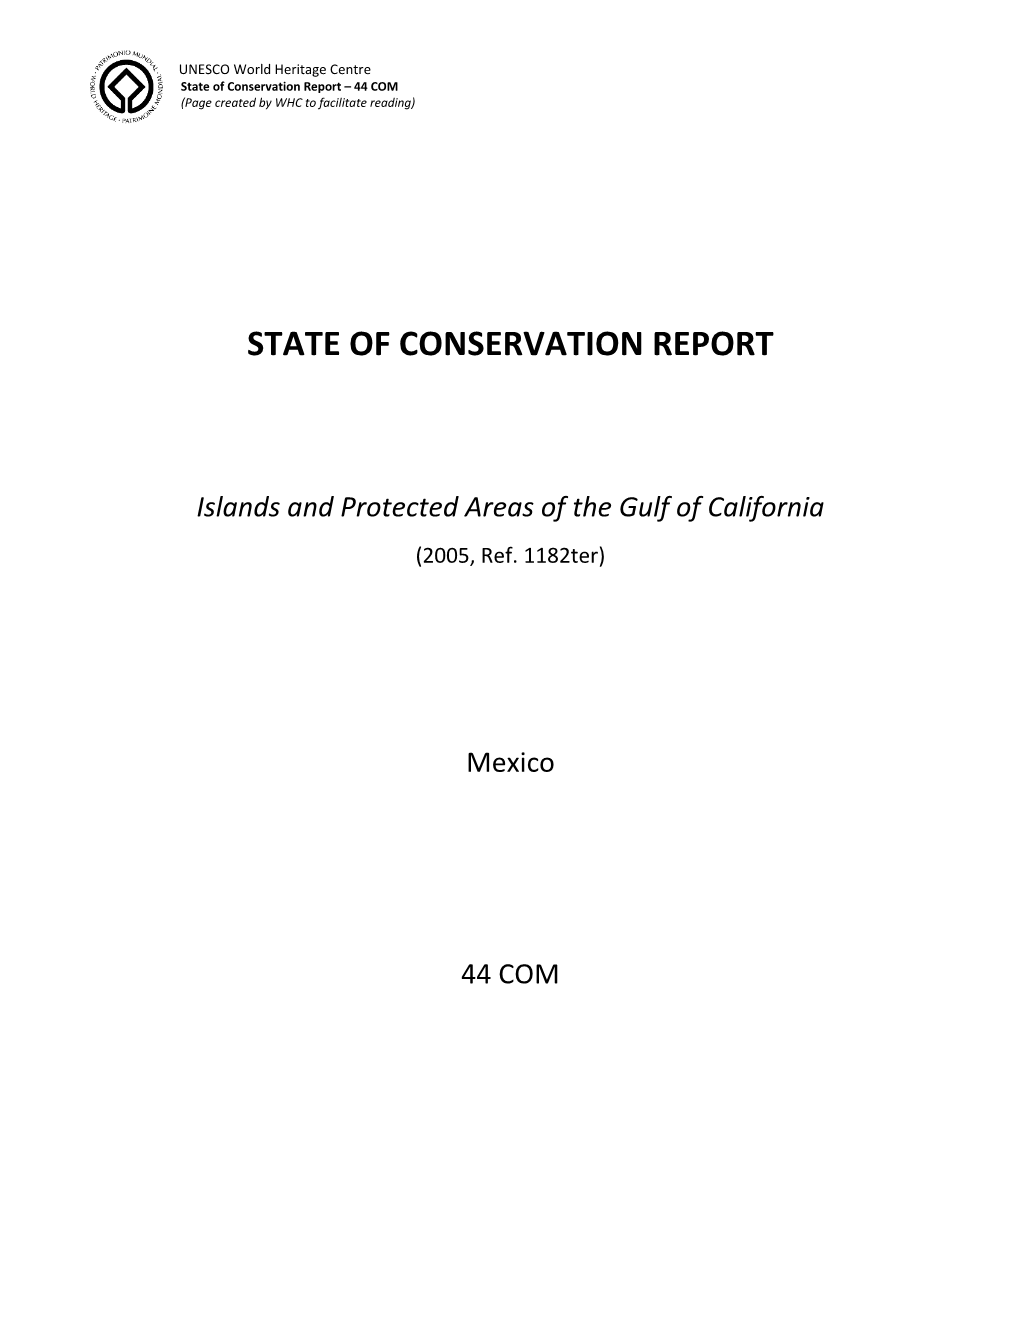 State of Conservation Report – 44 COM (Page Created by WHC to Facilitate Reading)